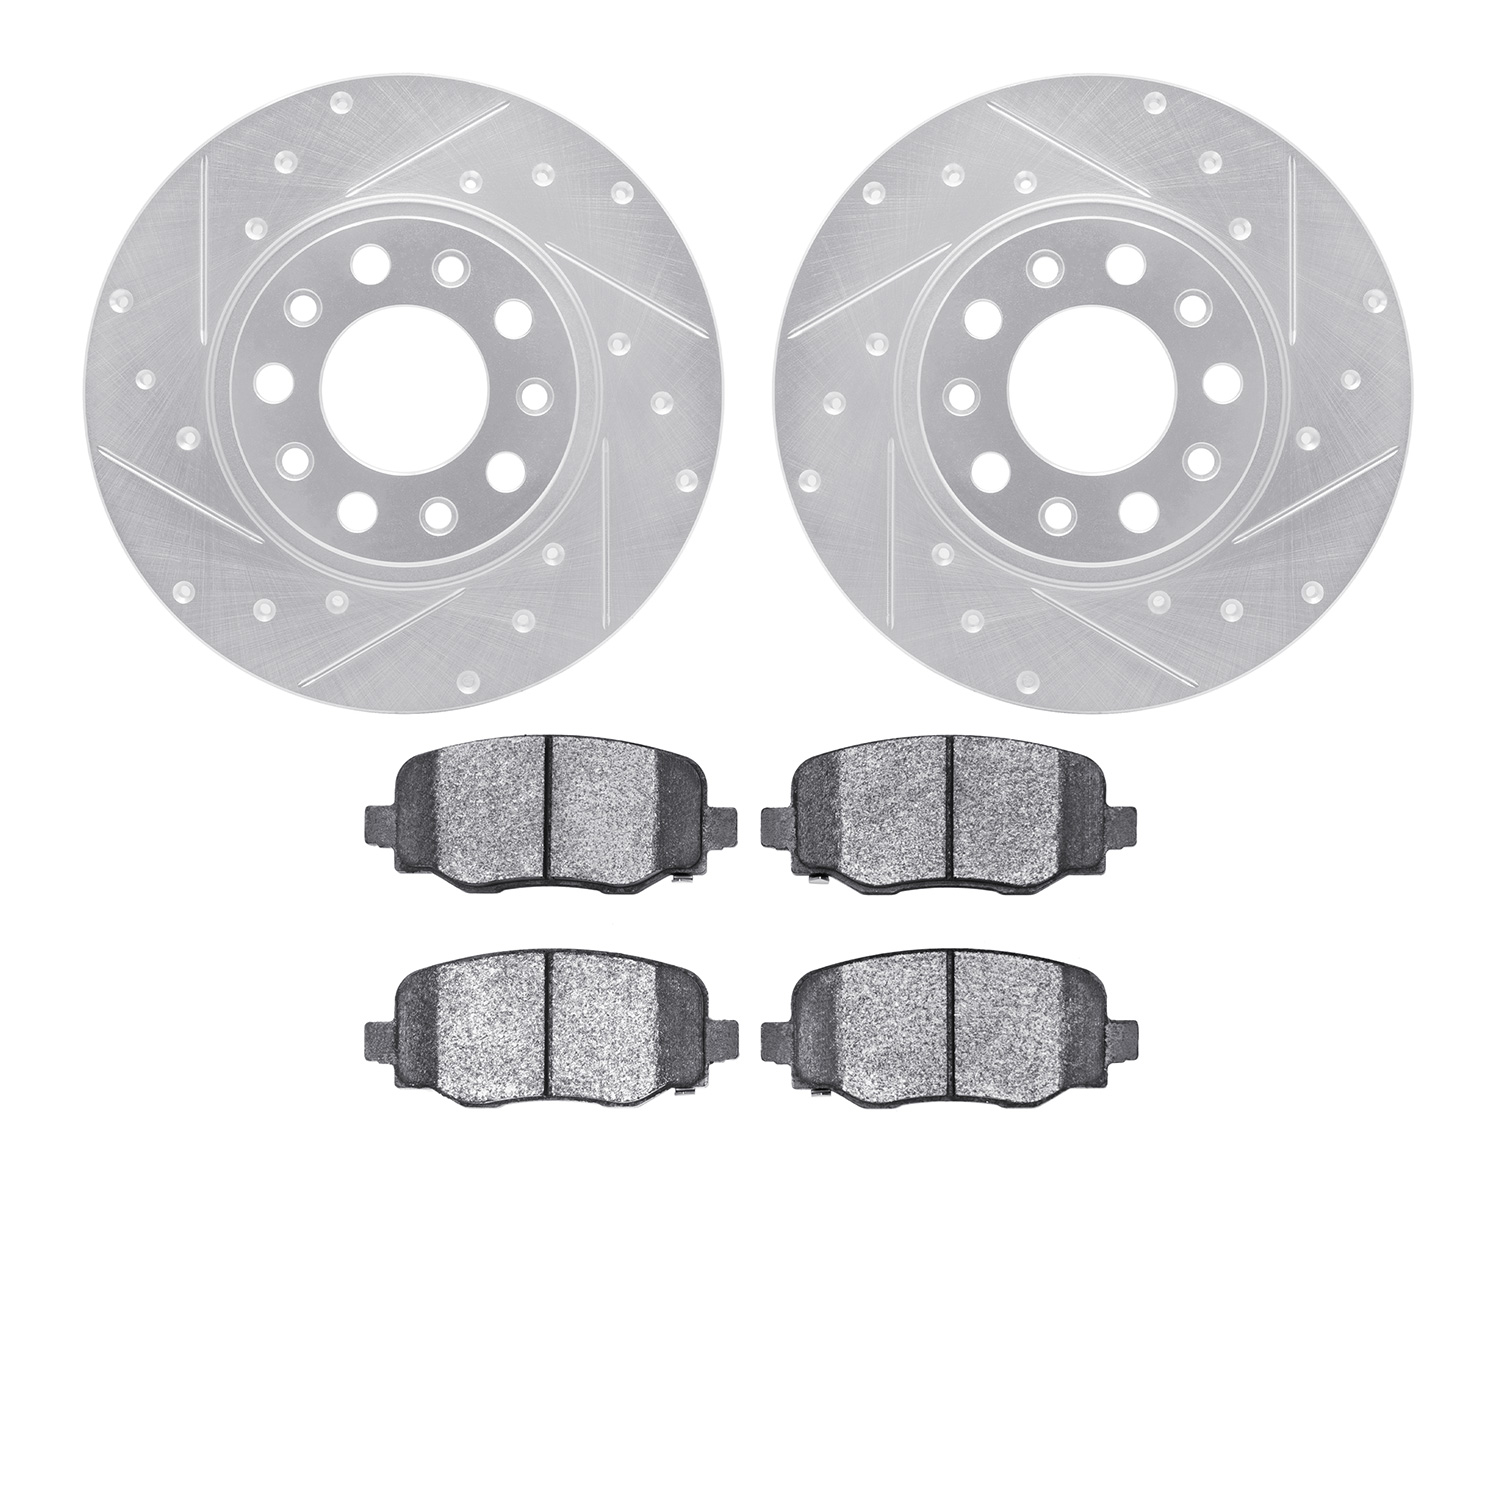 7402-42013 Drilled/Slotted Brake Rotors with Ultimate-Duty Brake Pads Kit [Silver], Fits Select Mopar, Position: Rear